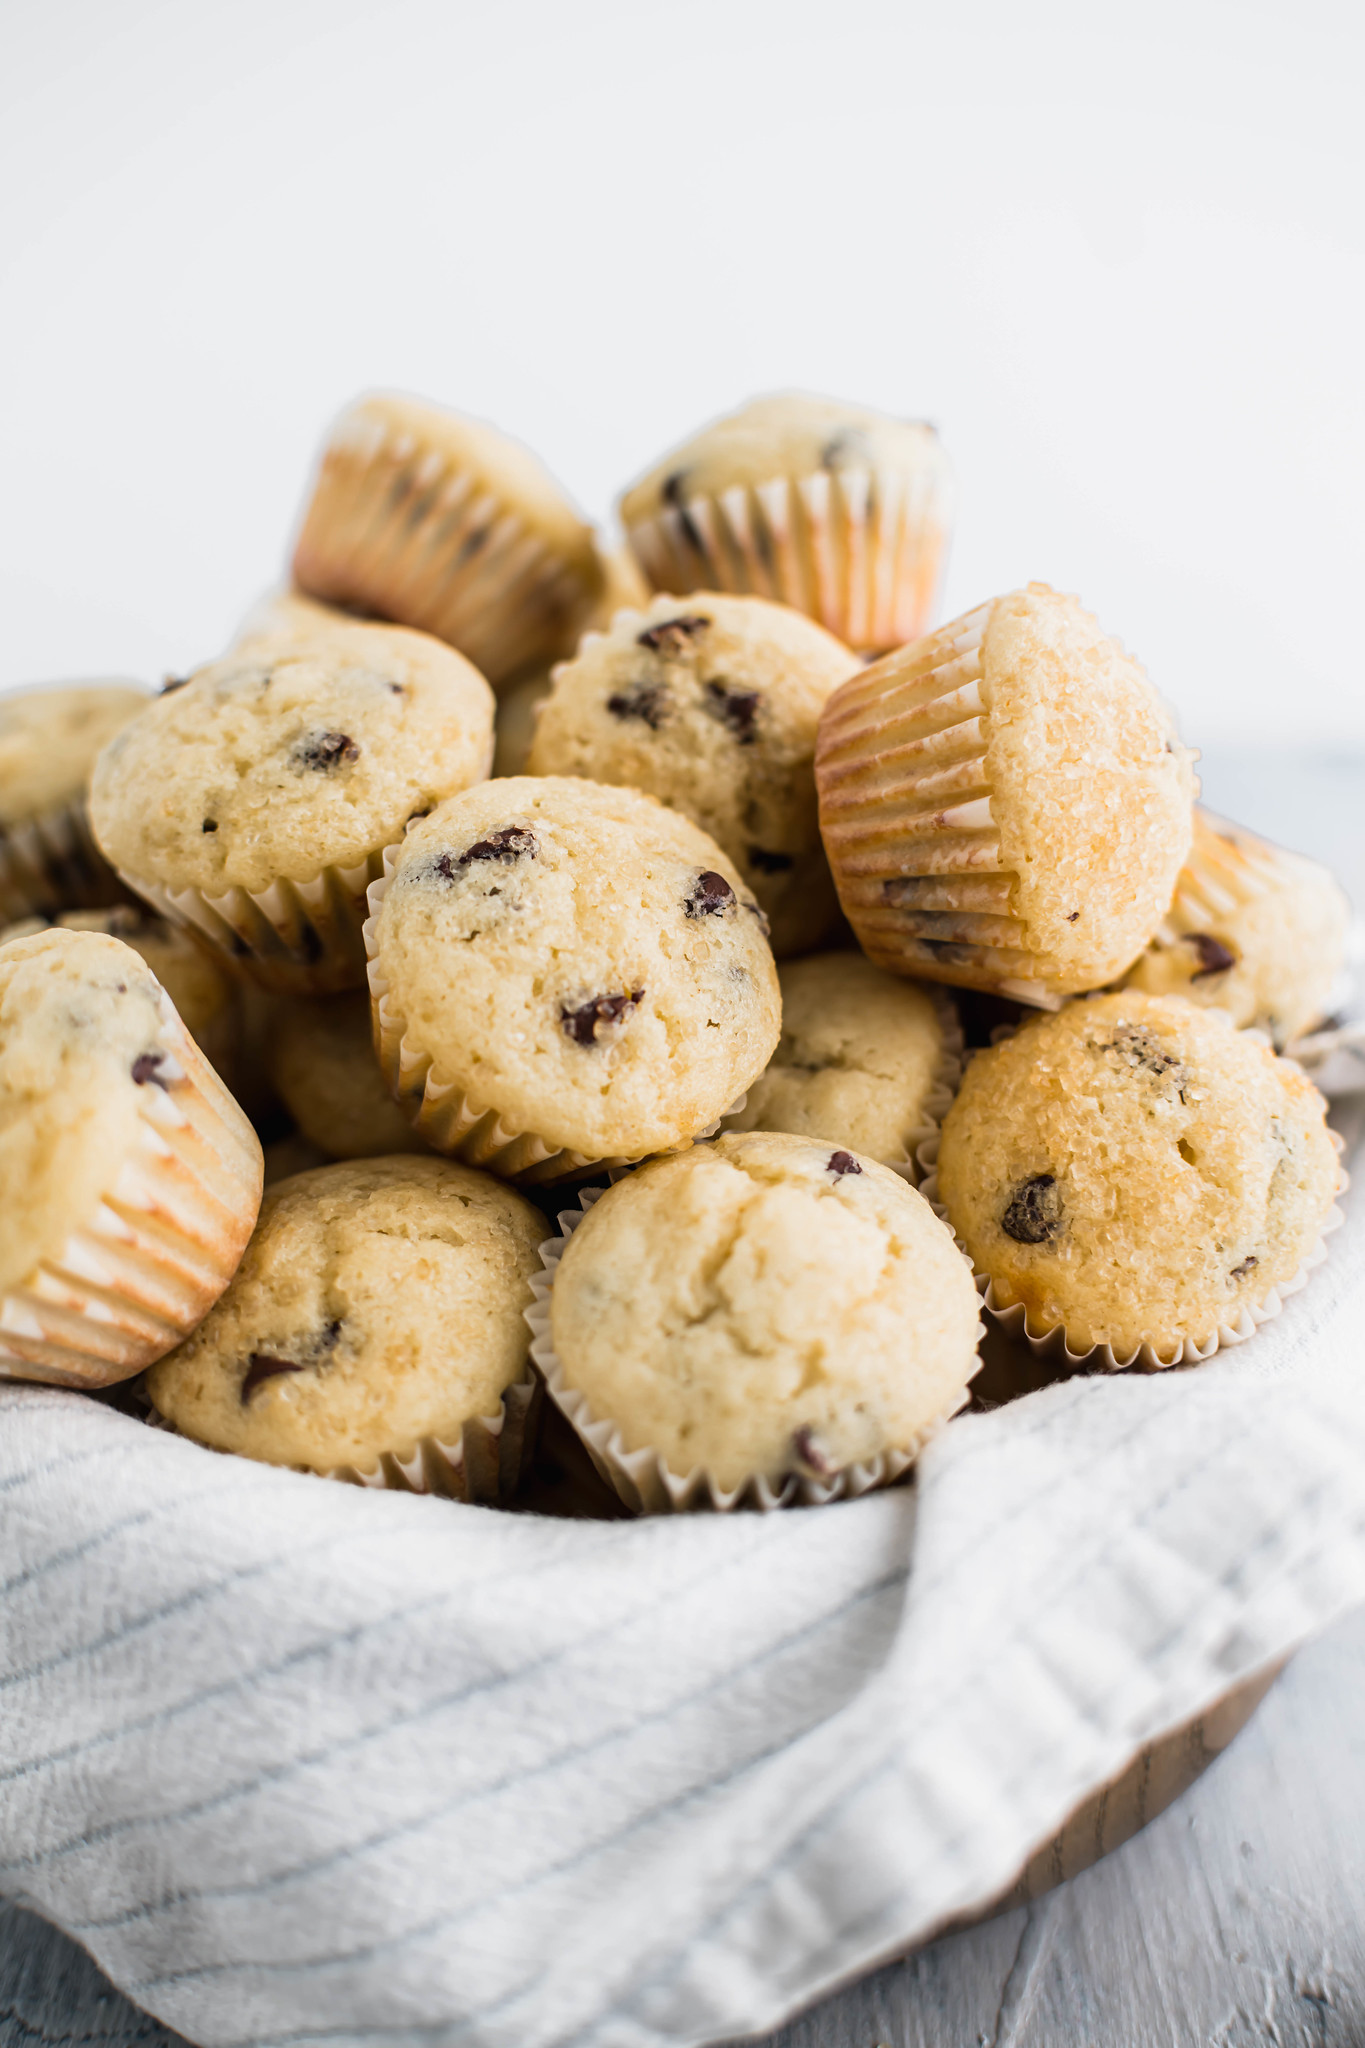 Mini chocolate chip muffins piled in a bowl lined with a white and gray striped kitchen towel.